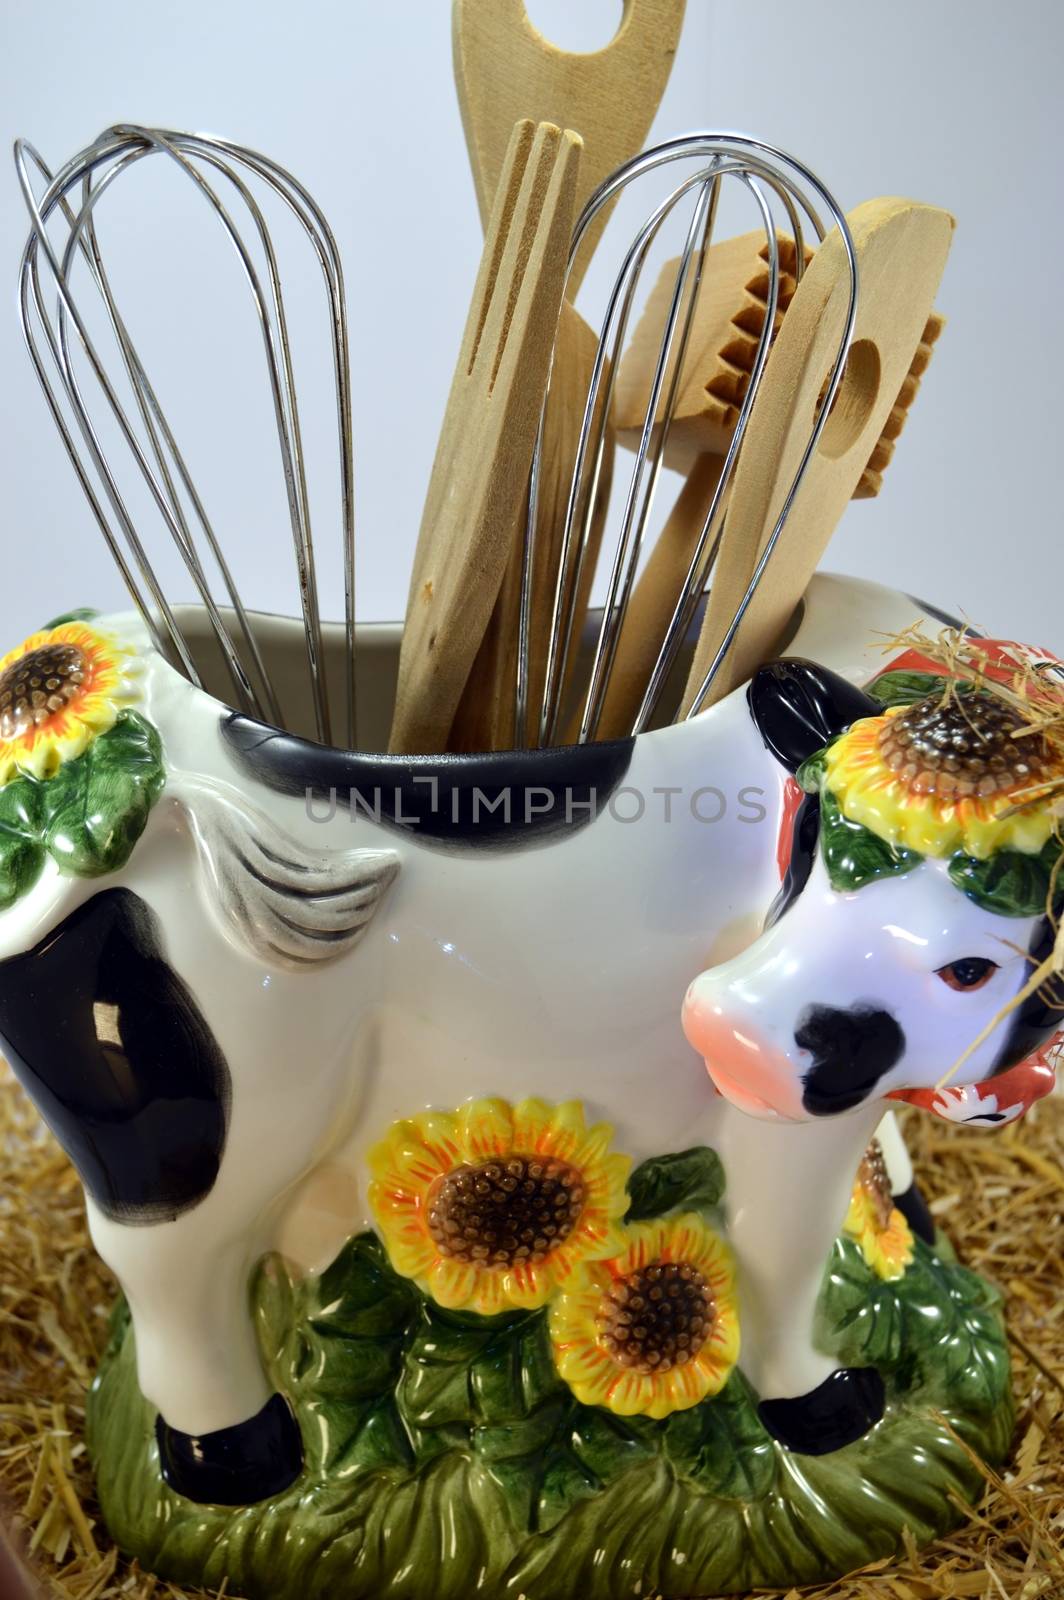 Distort cow with the hollow back and the kitchen utensils by Philou1000